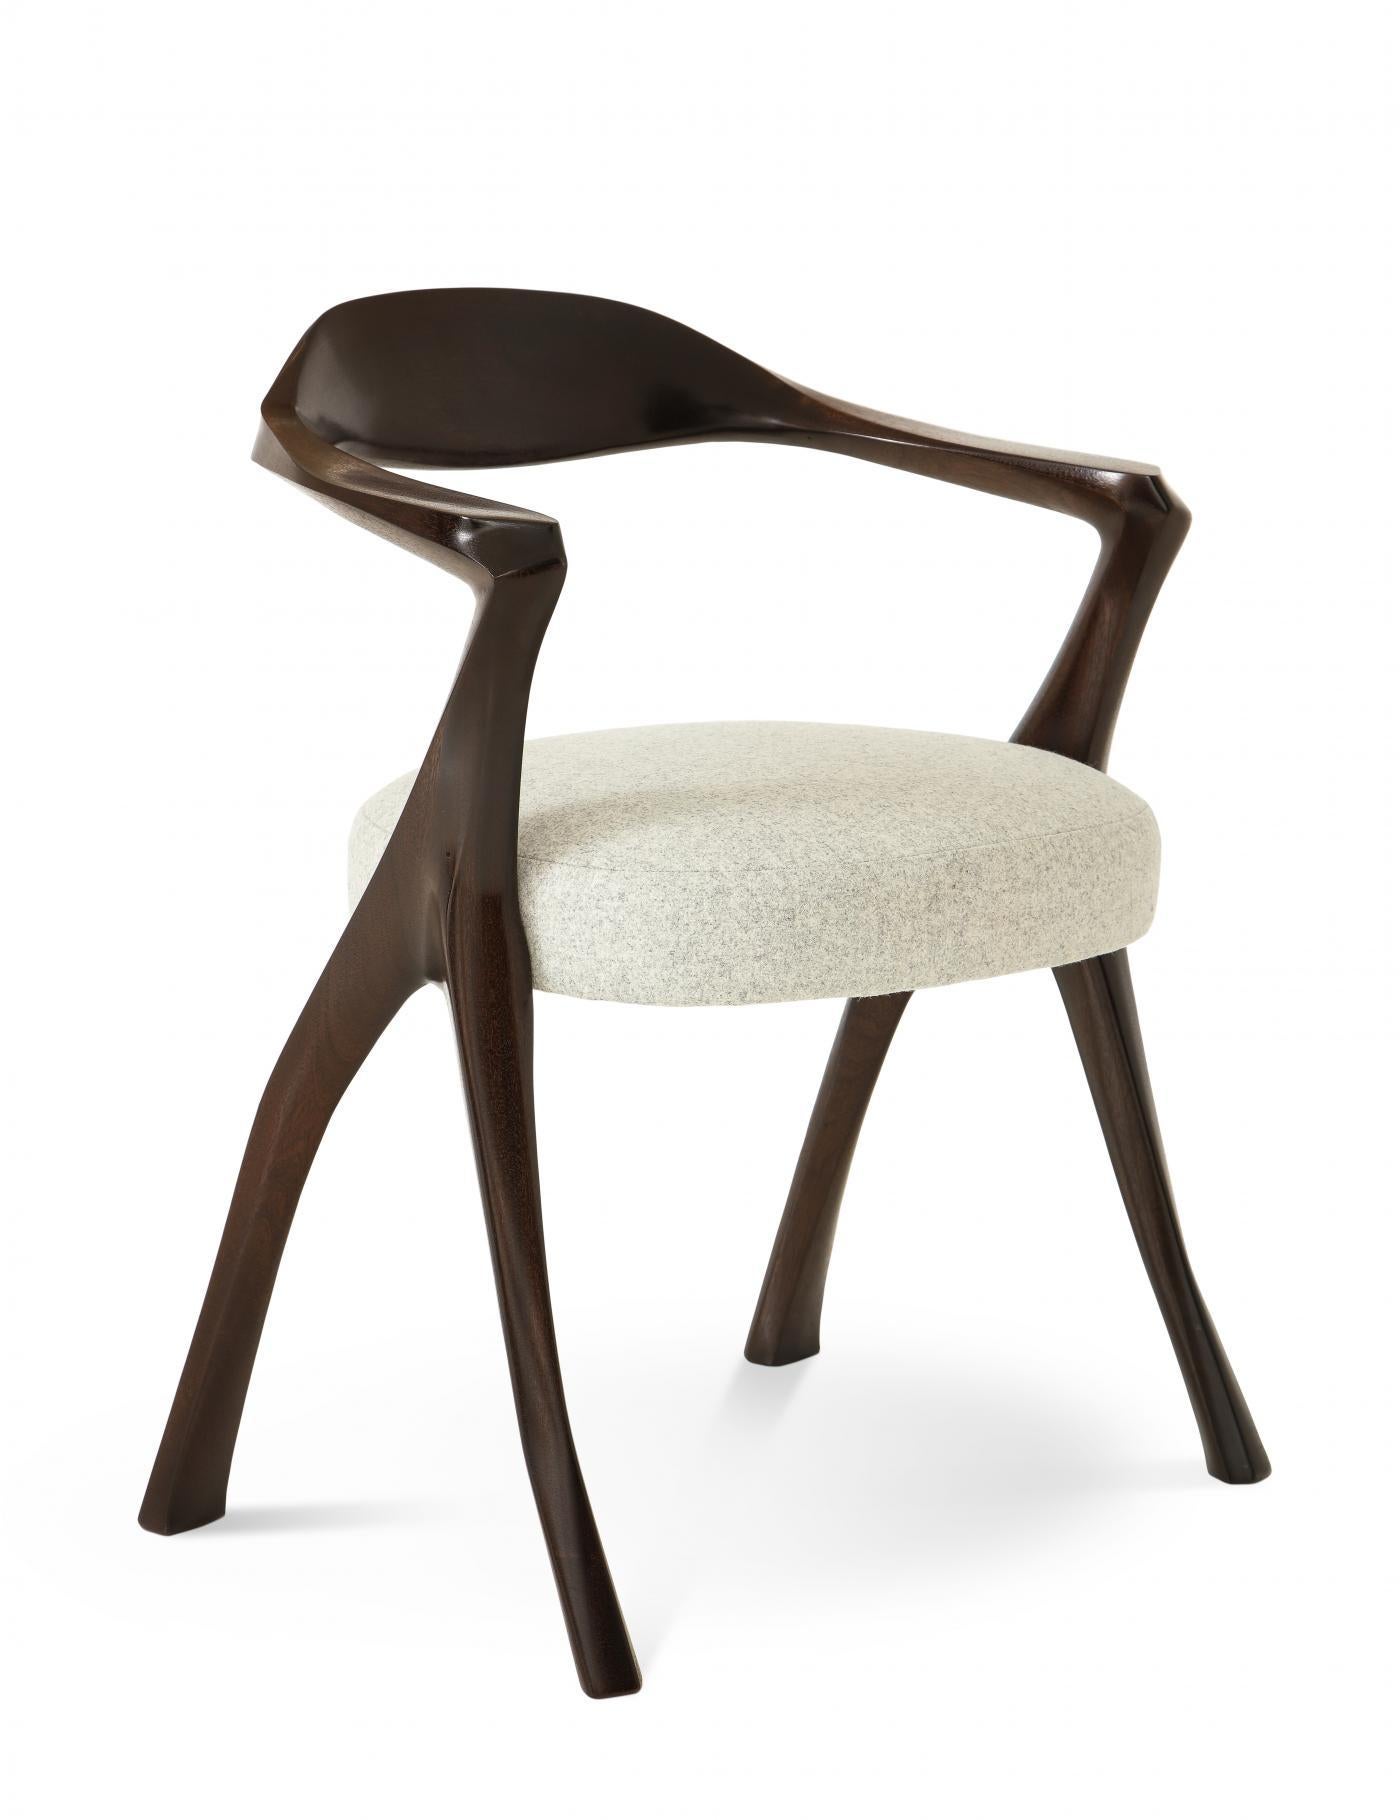 A Sculptural Modernist Armchair by Newman-Krasnogorov. Contemporary
 Executed in Sapele Traite wood.